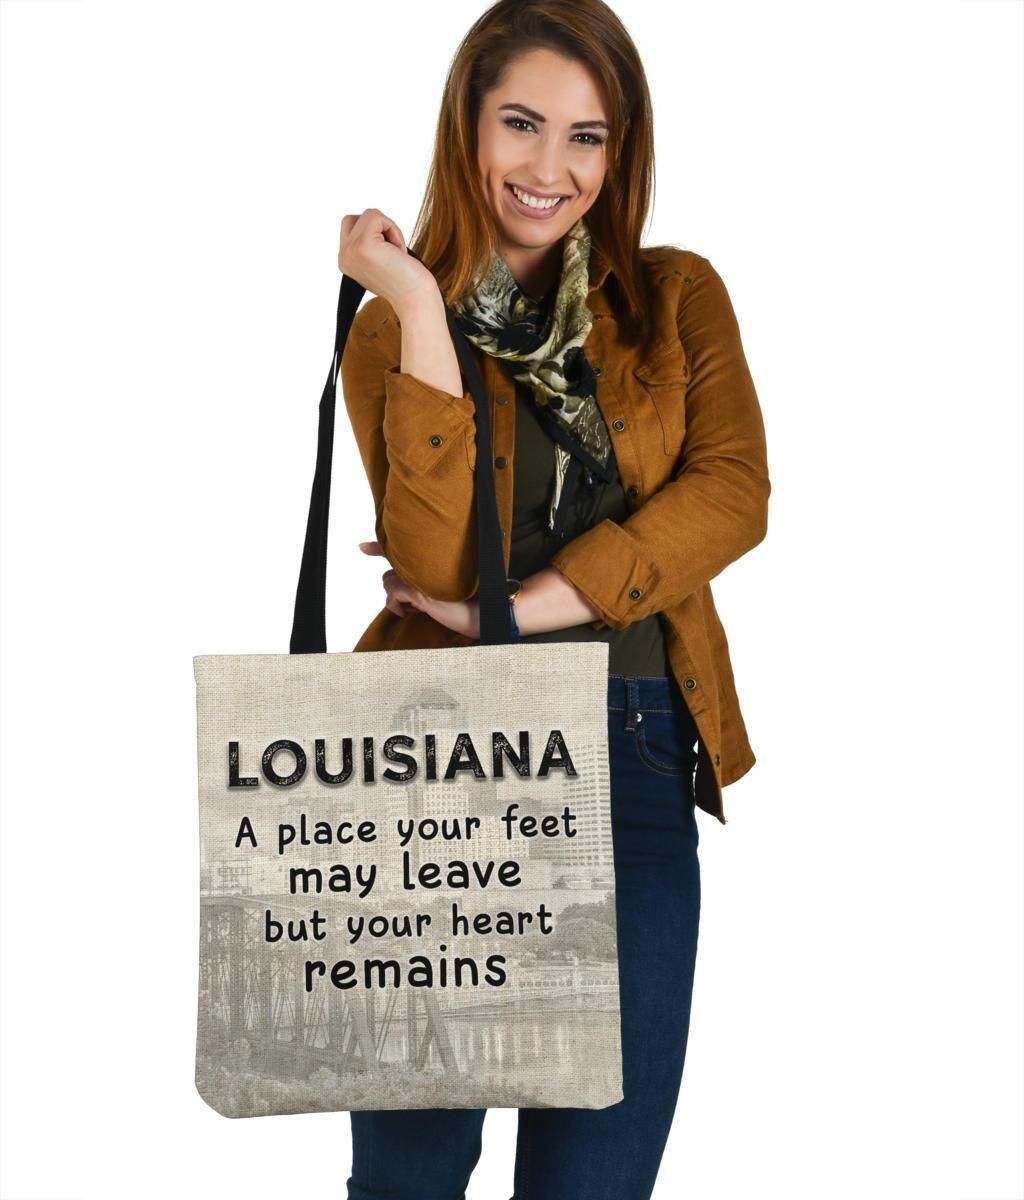 Louisiana A Place Your Feet Leave Your Heart Remains Tote Bag